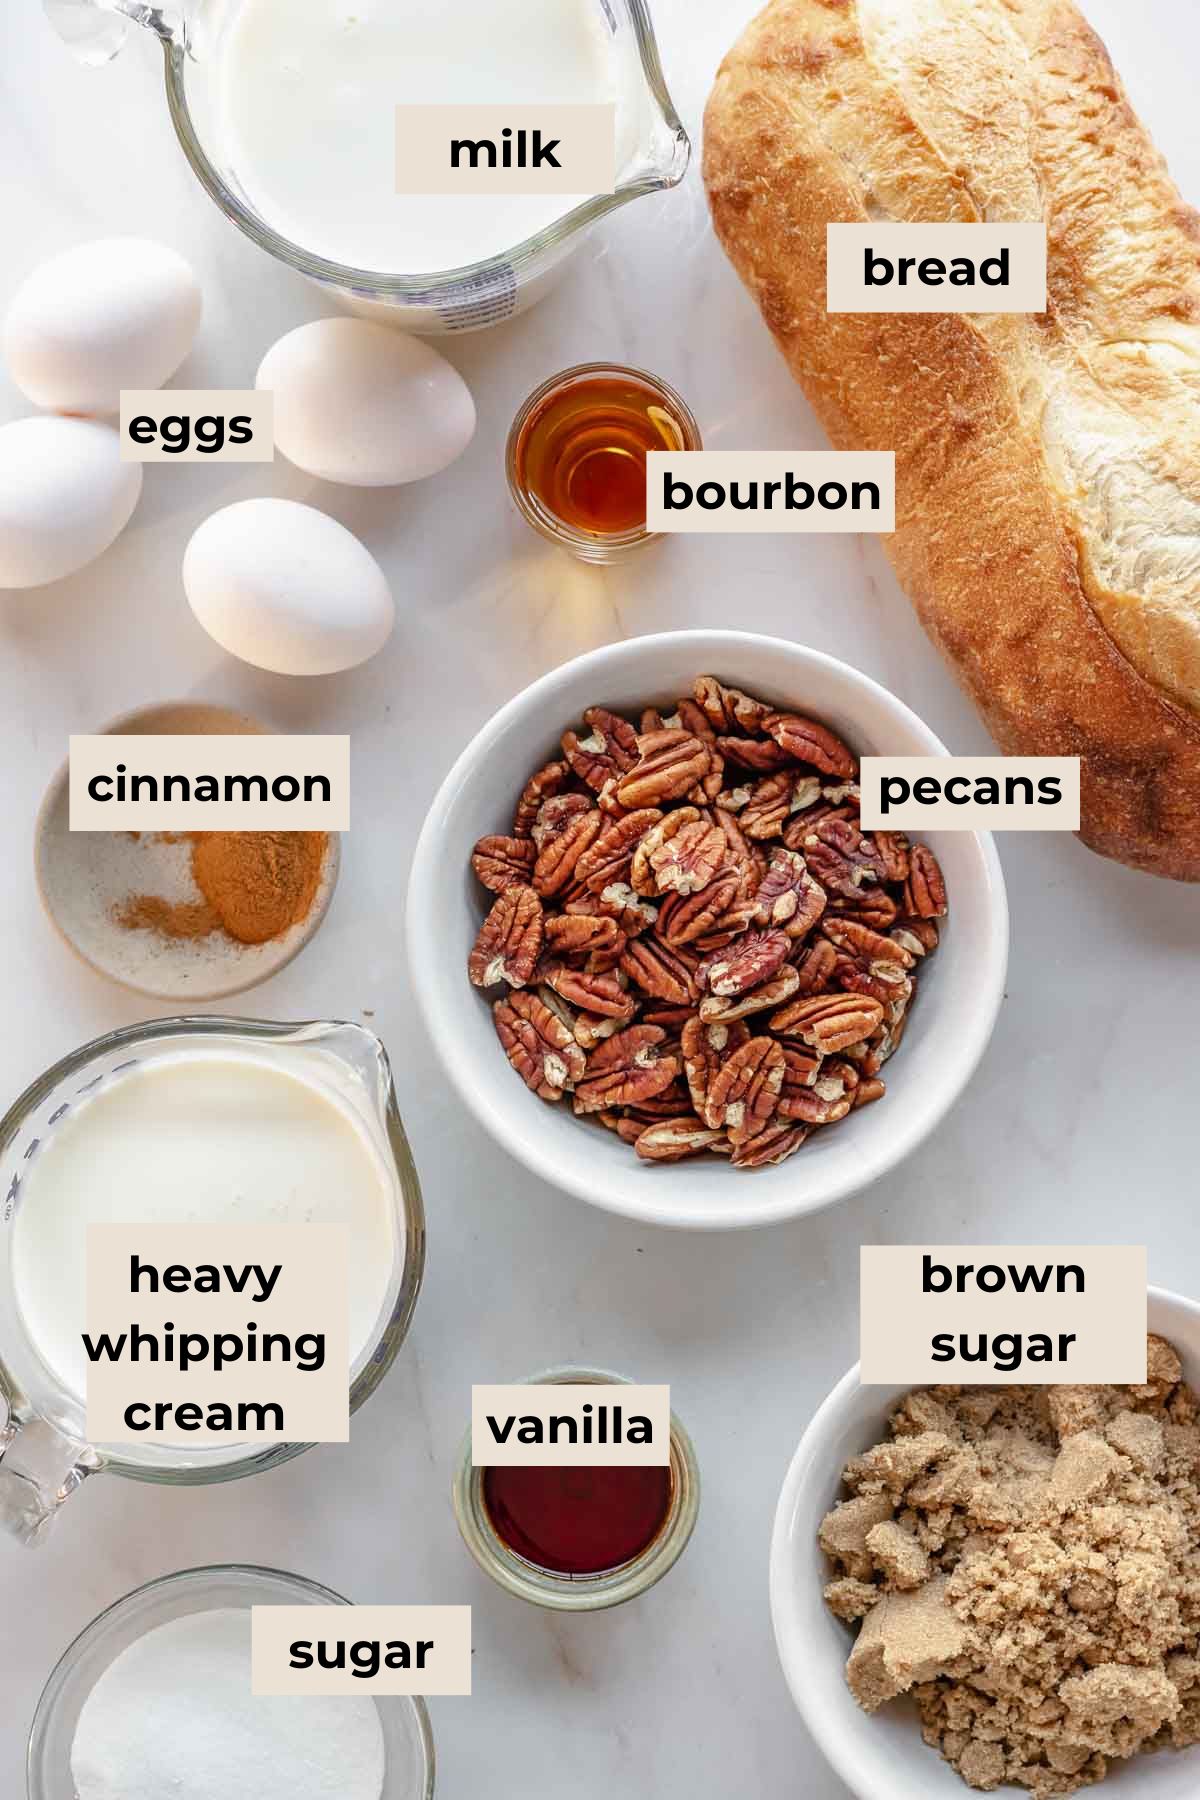 Ingredients for pecan bread pudding with vanilla sauce.